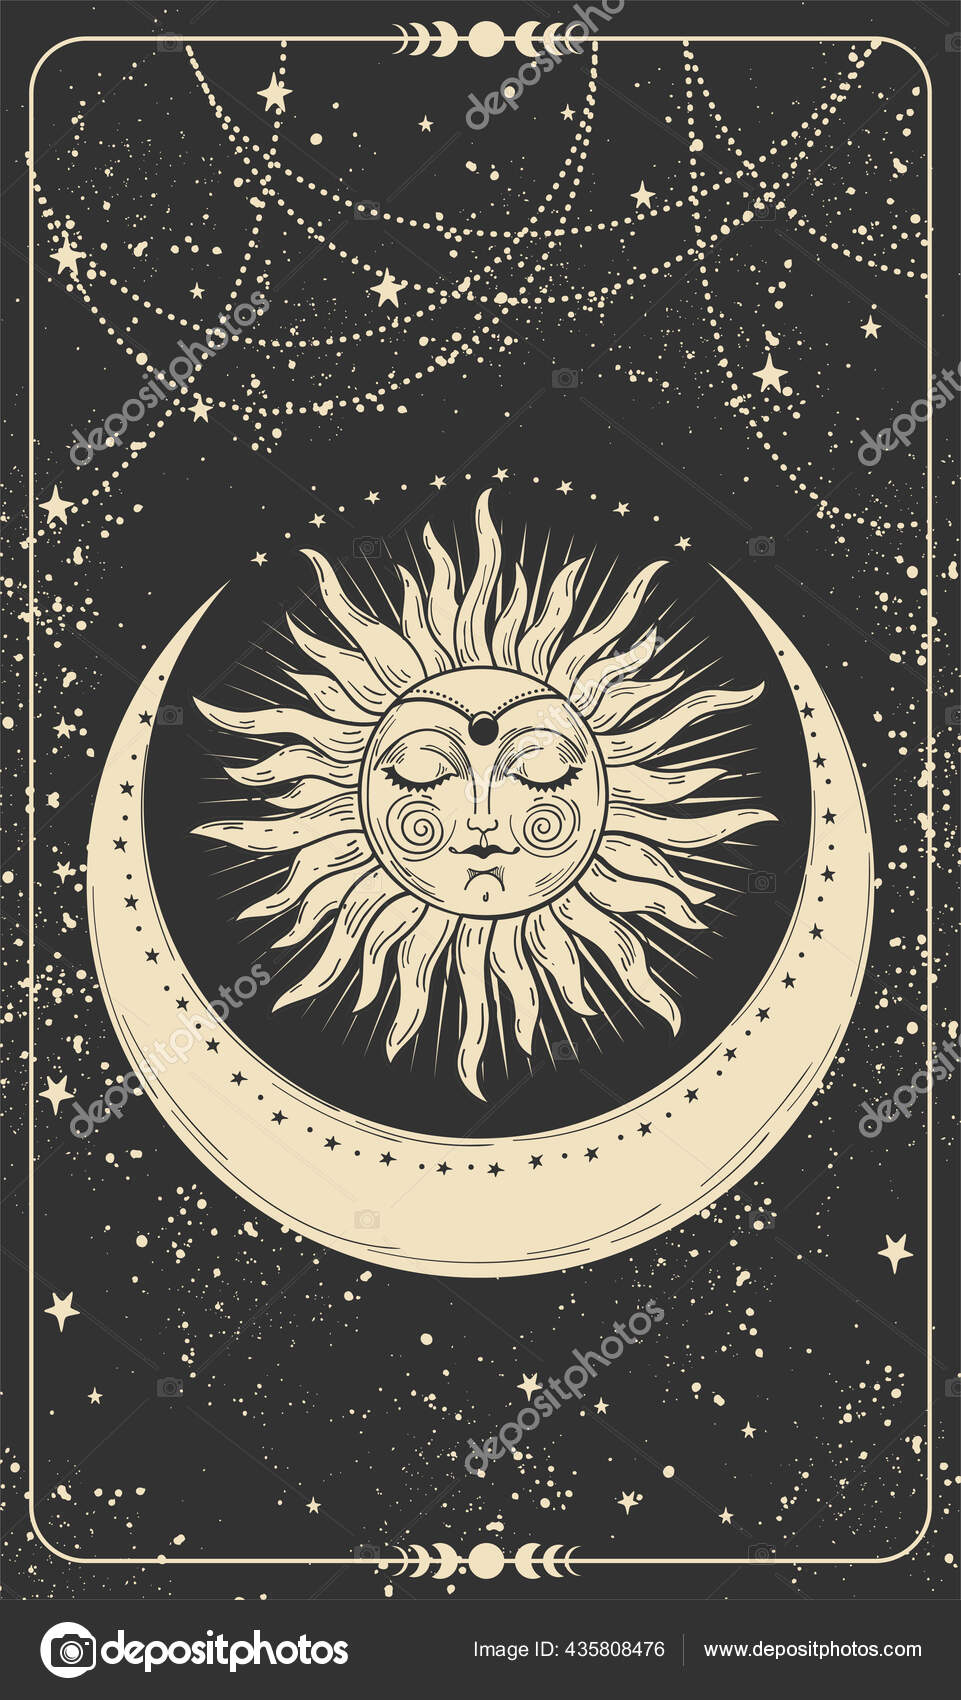 Mystical Drawing Of The Sun With A Face And A Crescent Moon Tarot Cards Boho Illustration